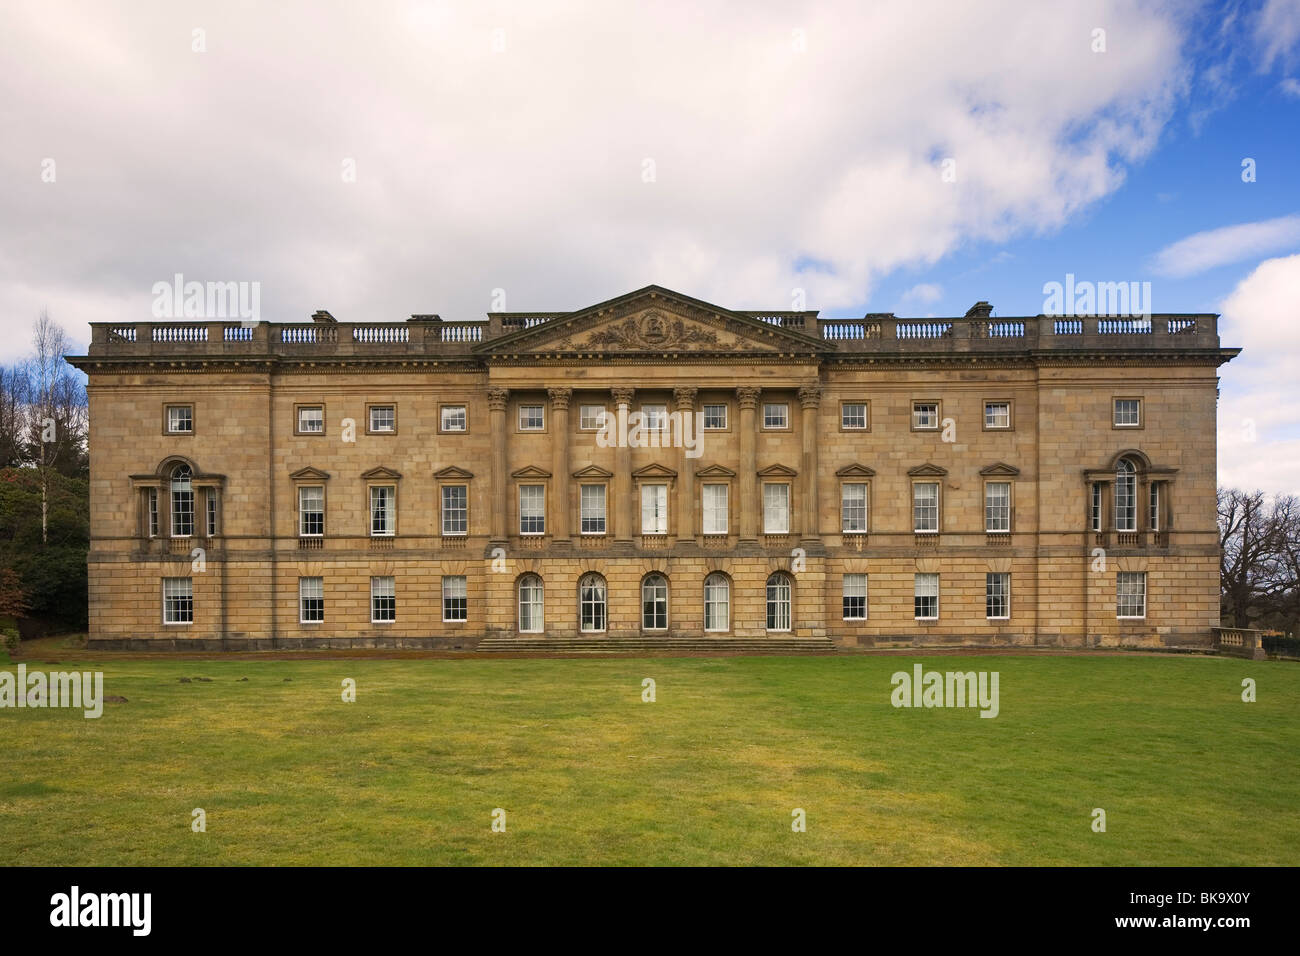 Stainborough Hall, a stately grade one listed mansion on the Wentworth Castle Estate at Barnsley, South Yorkshire, UK Stock Photo